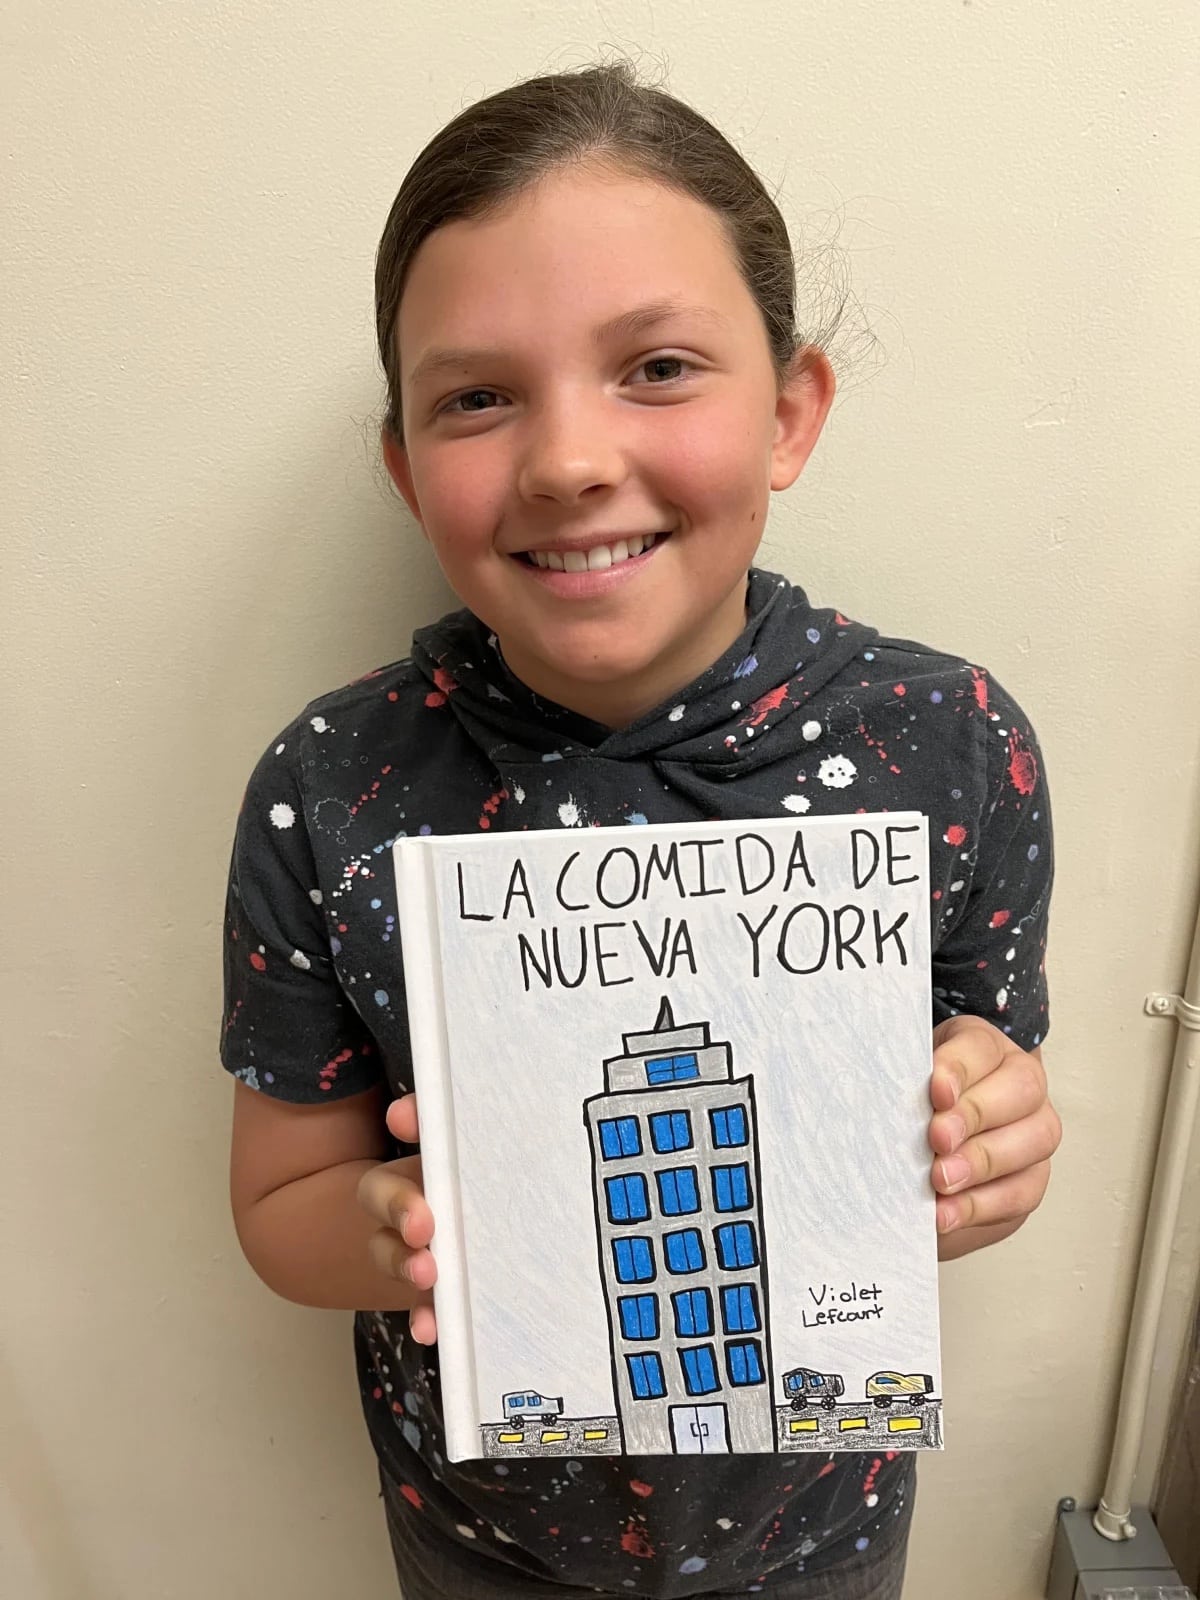 An Ethical Culture Fieldston School 5th Grade student holding a book they designed